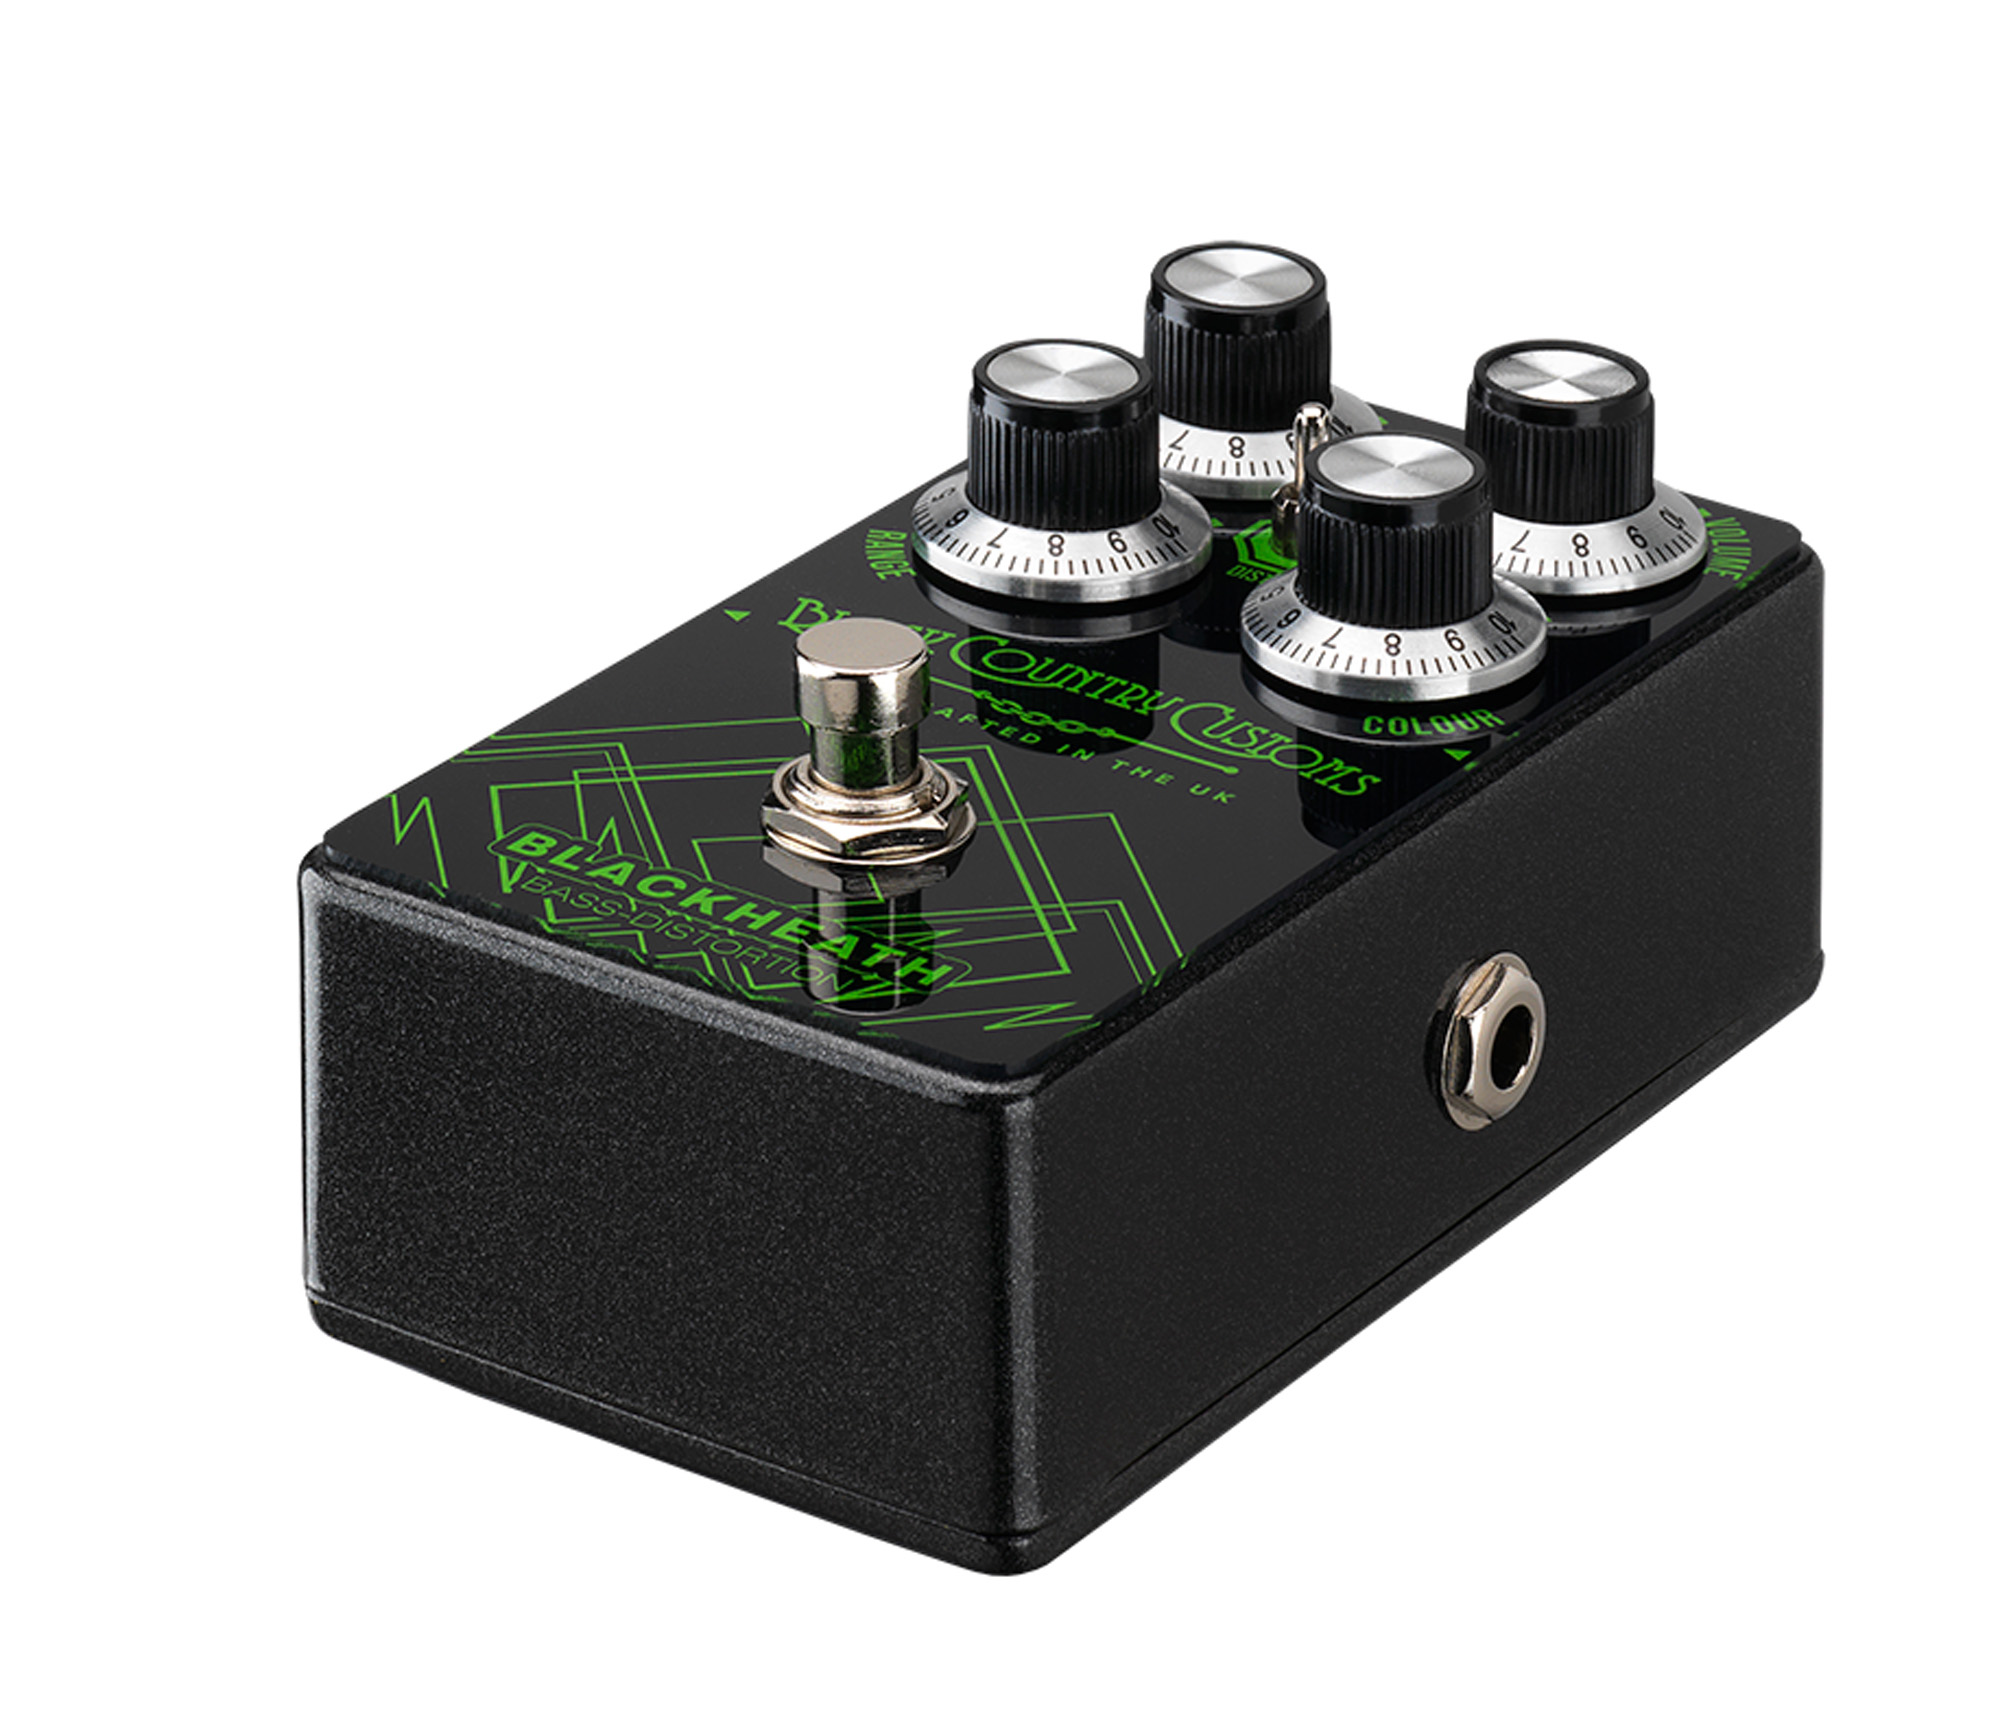 Laney Blackheath Bass Distortion Bcc Serie - Overdrive, distortion, fuzz effect pedal for bass - Variation 2